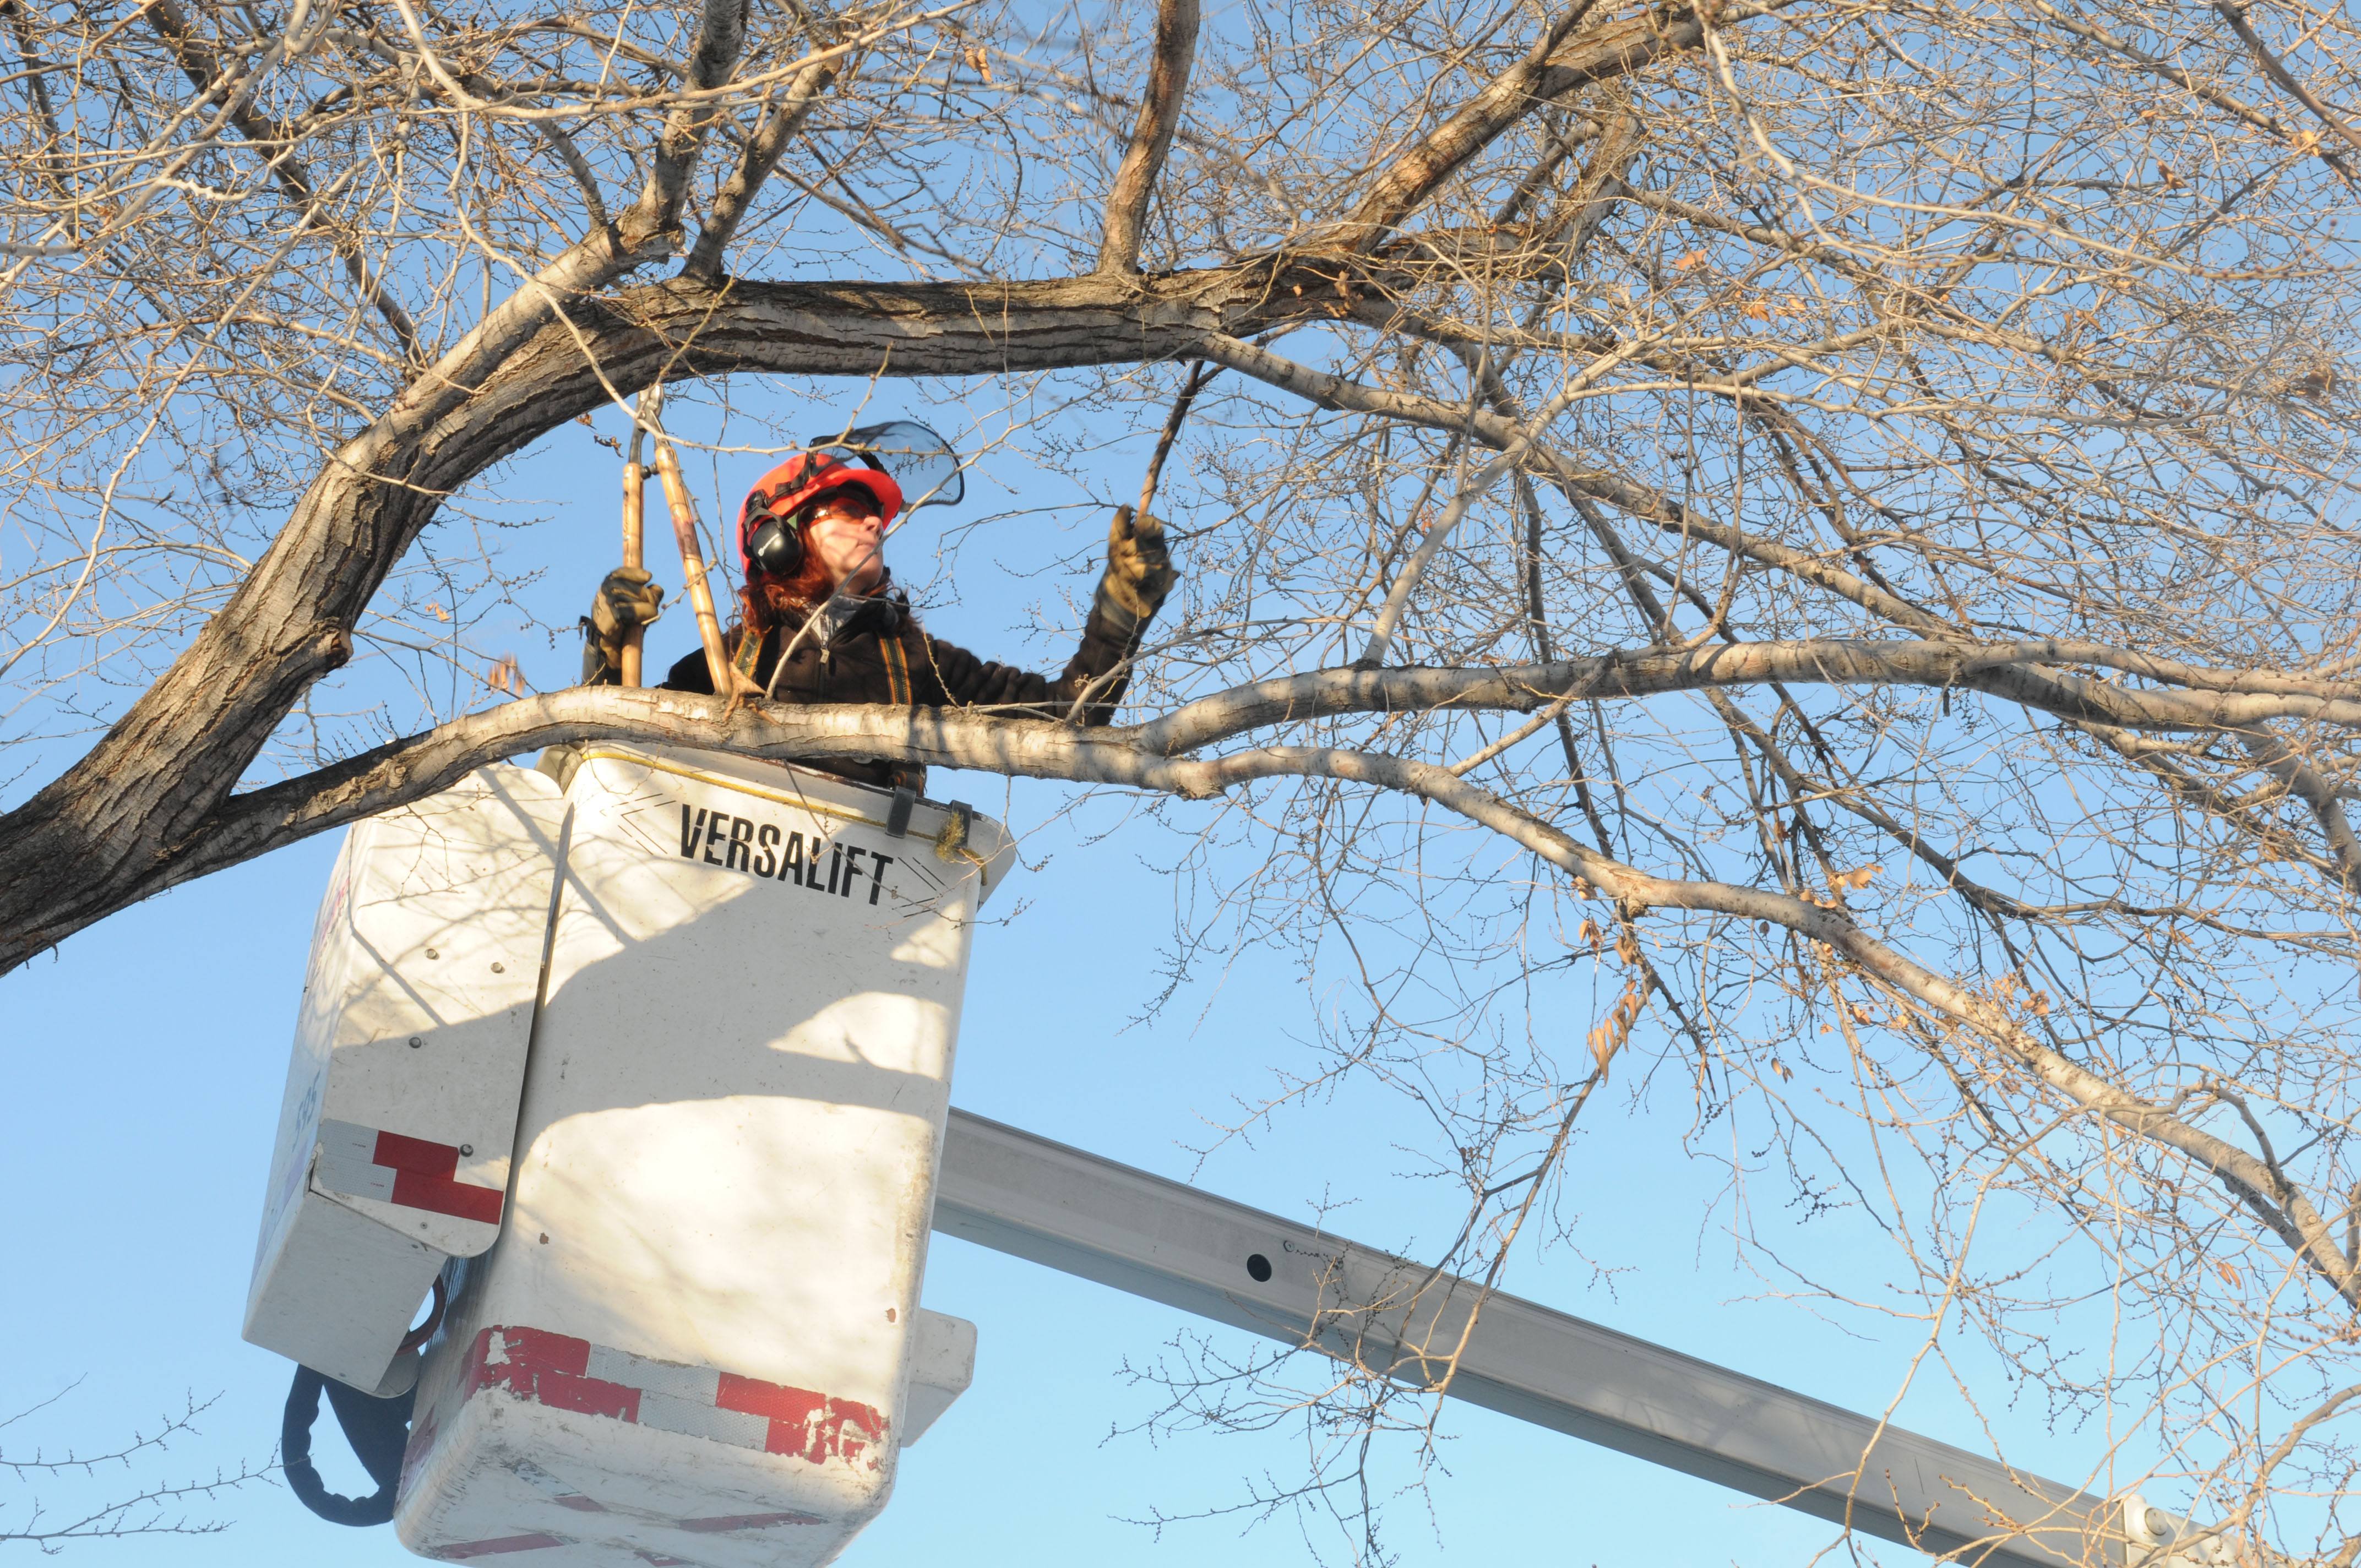 LITTLE TRIM- Mag Turple with the City of Red Deer works on trimming some dead branches off some trees recently.